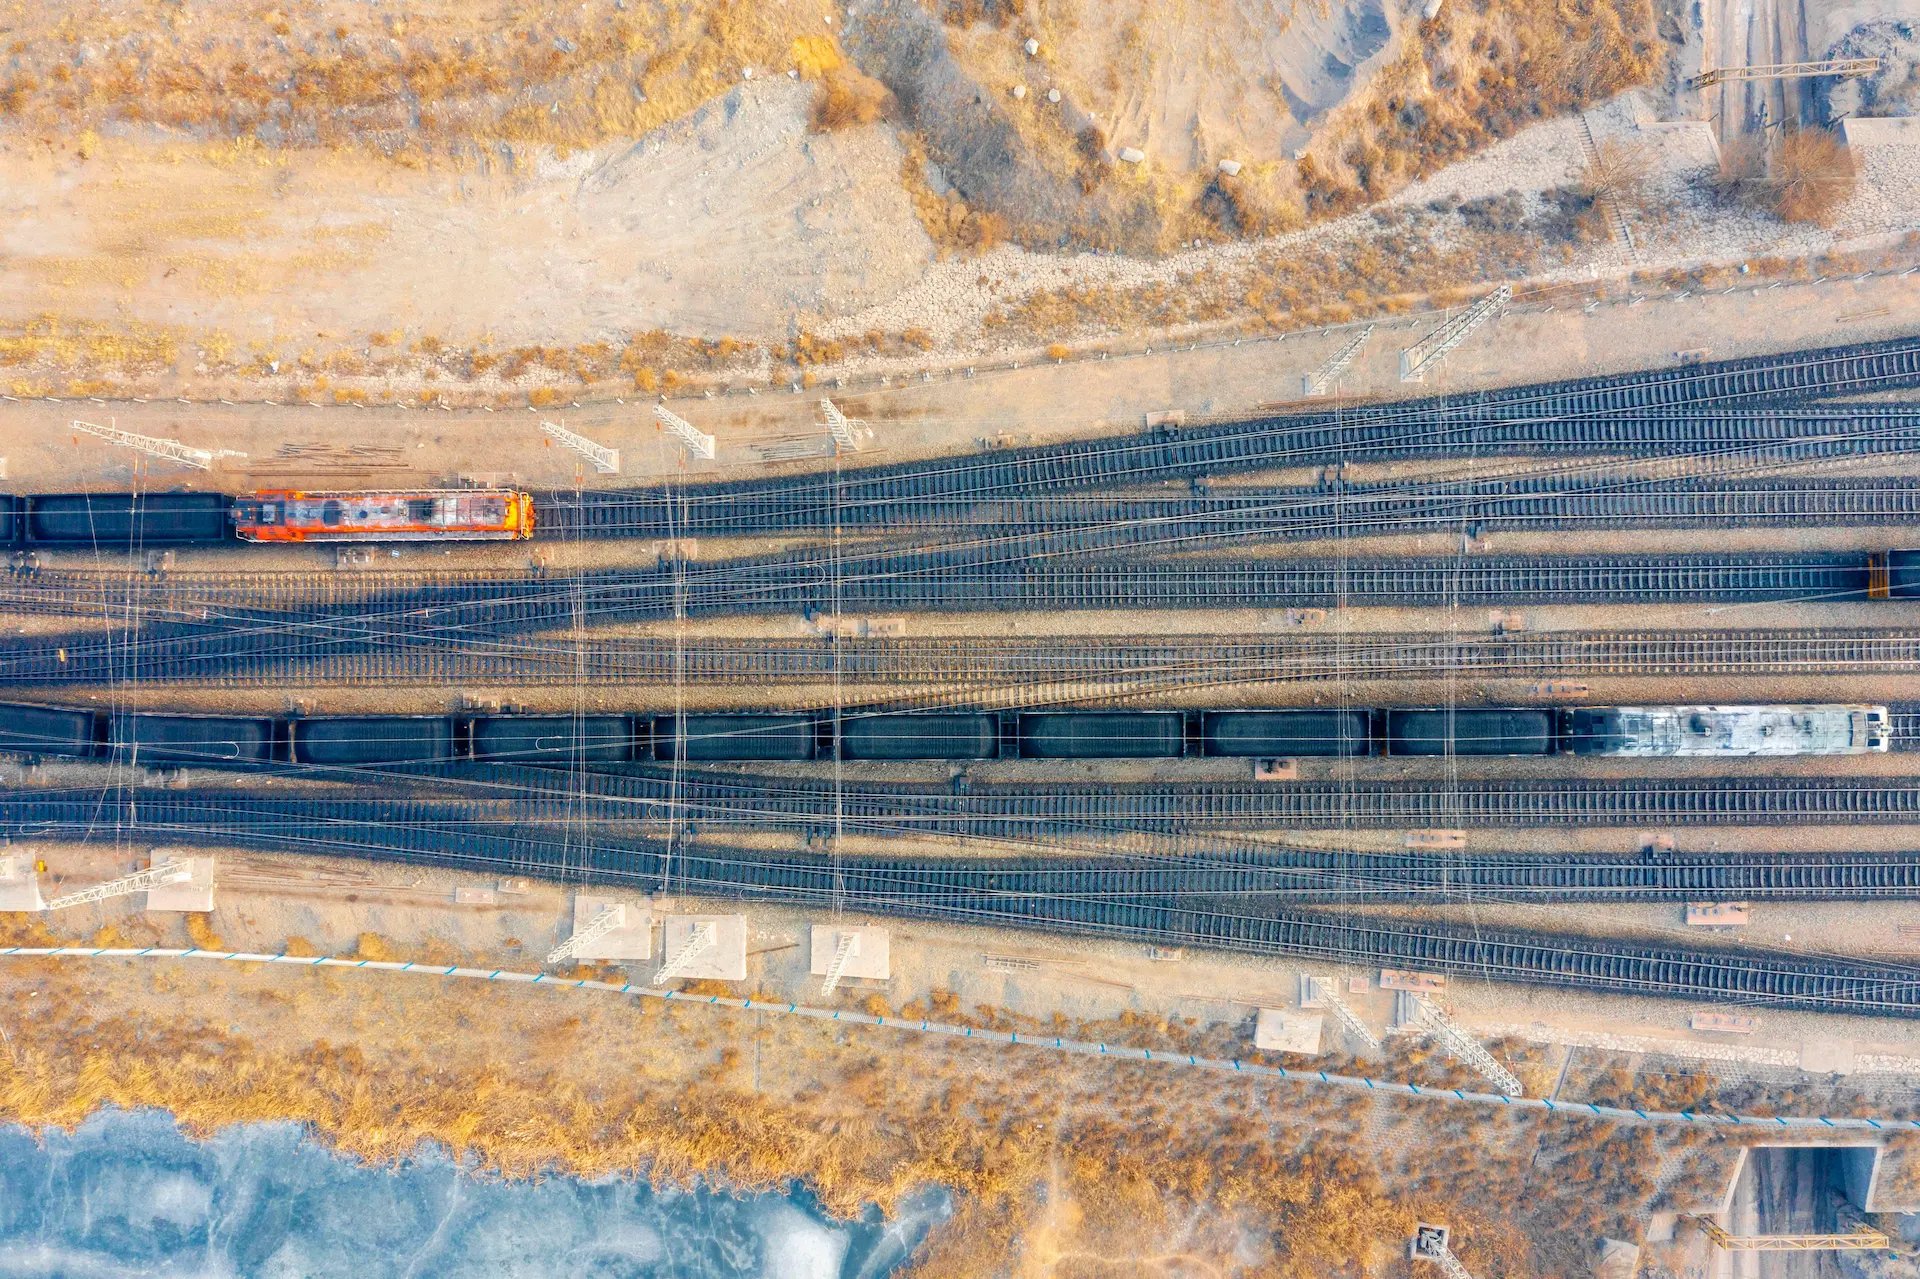 Coal trains wait to be transported at the Burtai coal mine in Inner Mongolia